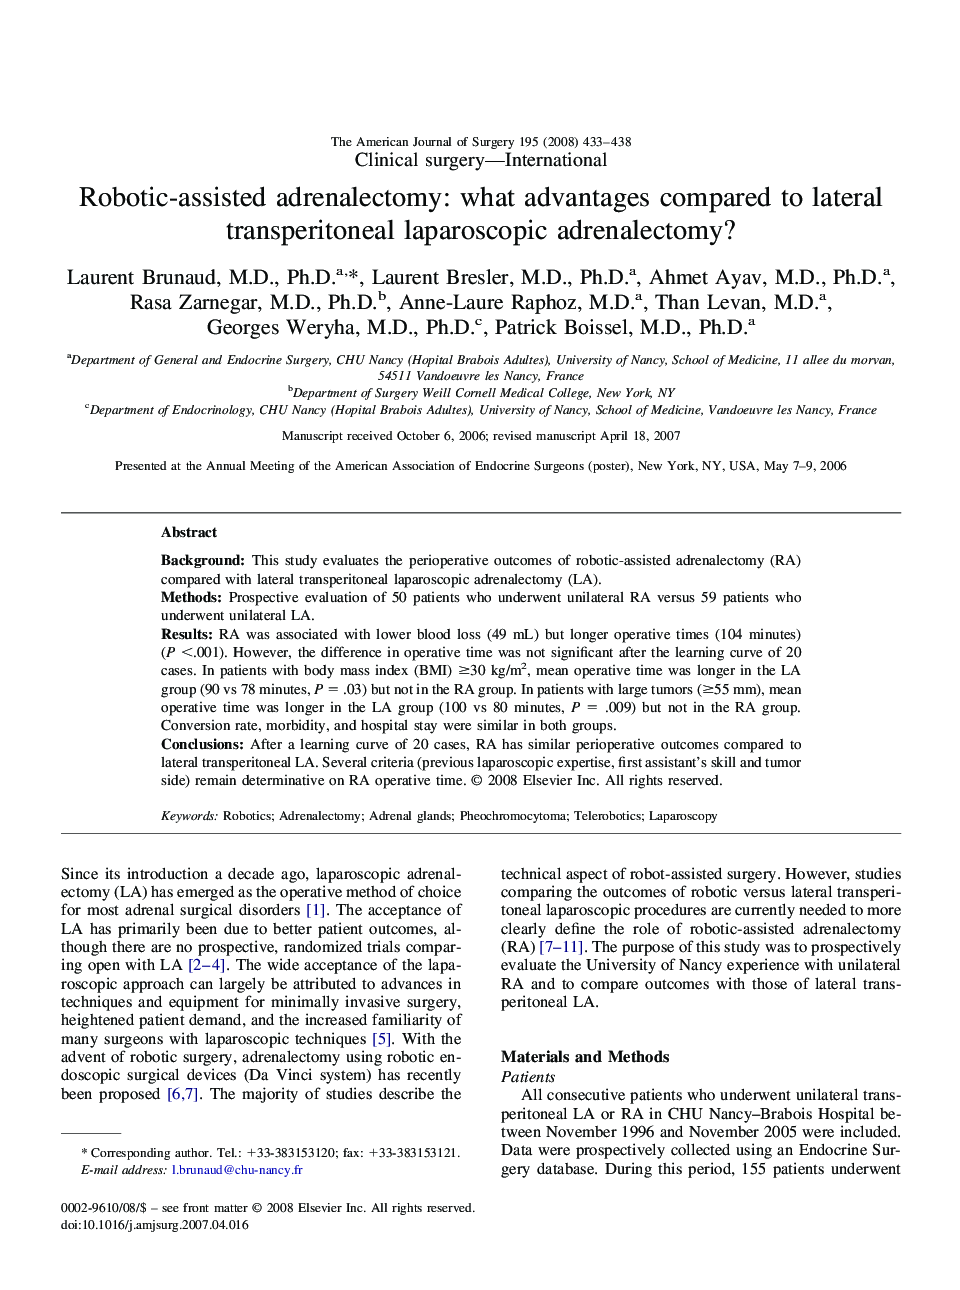 Robotic-assisted adrenalectomy: what advantages compared to lateral transperitoneal laparoscopic adrenalectomy?